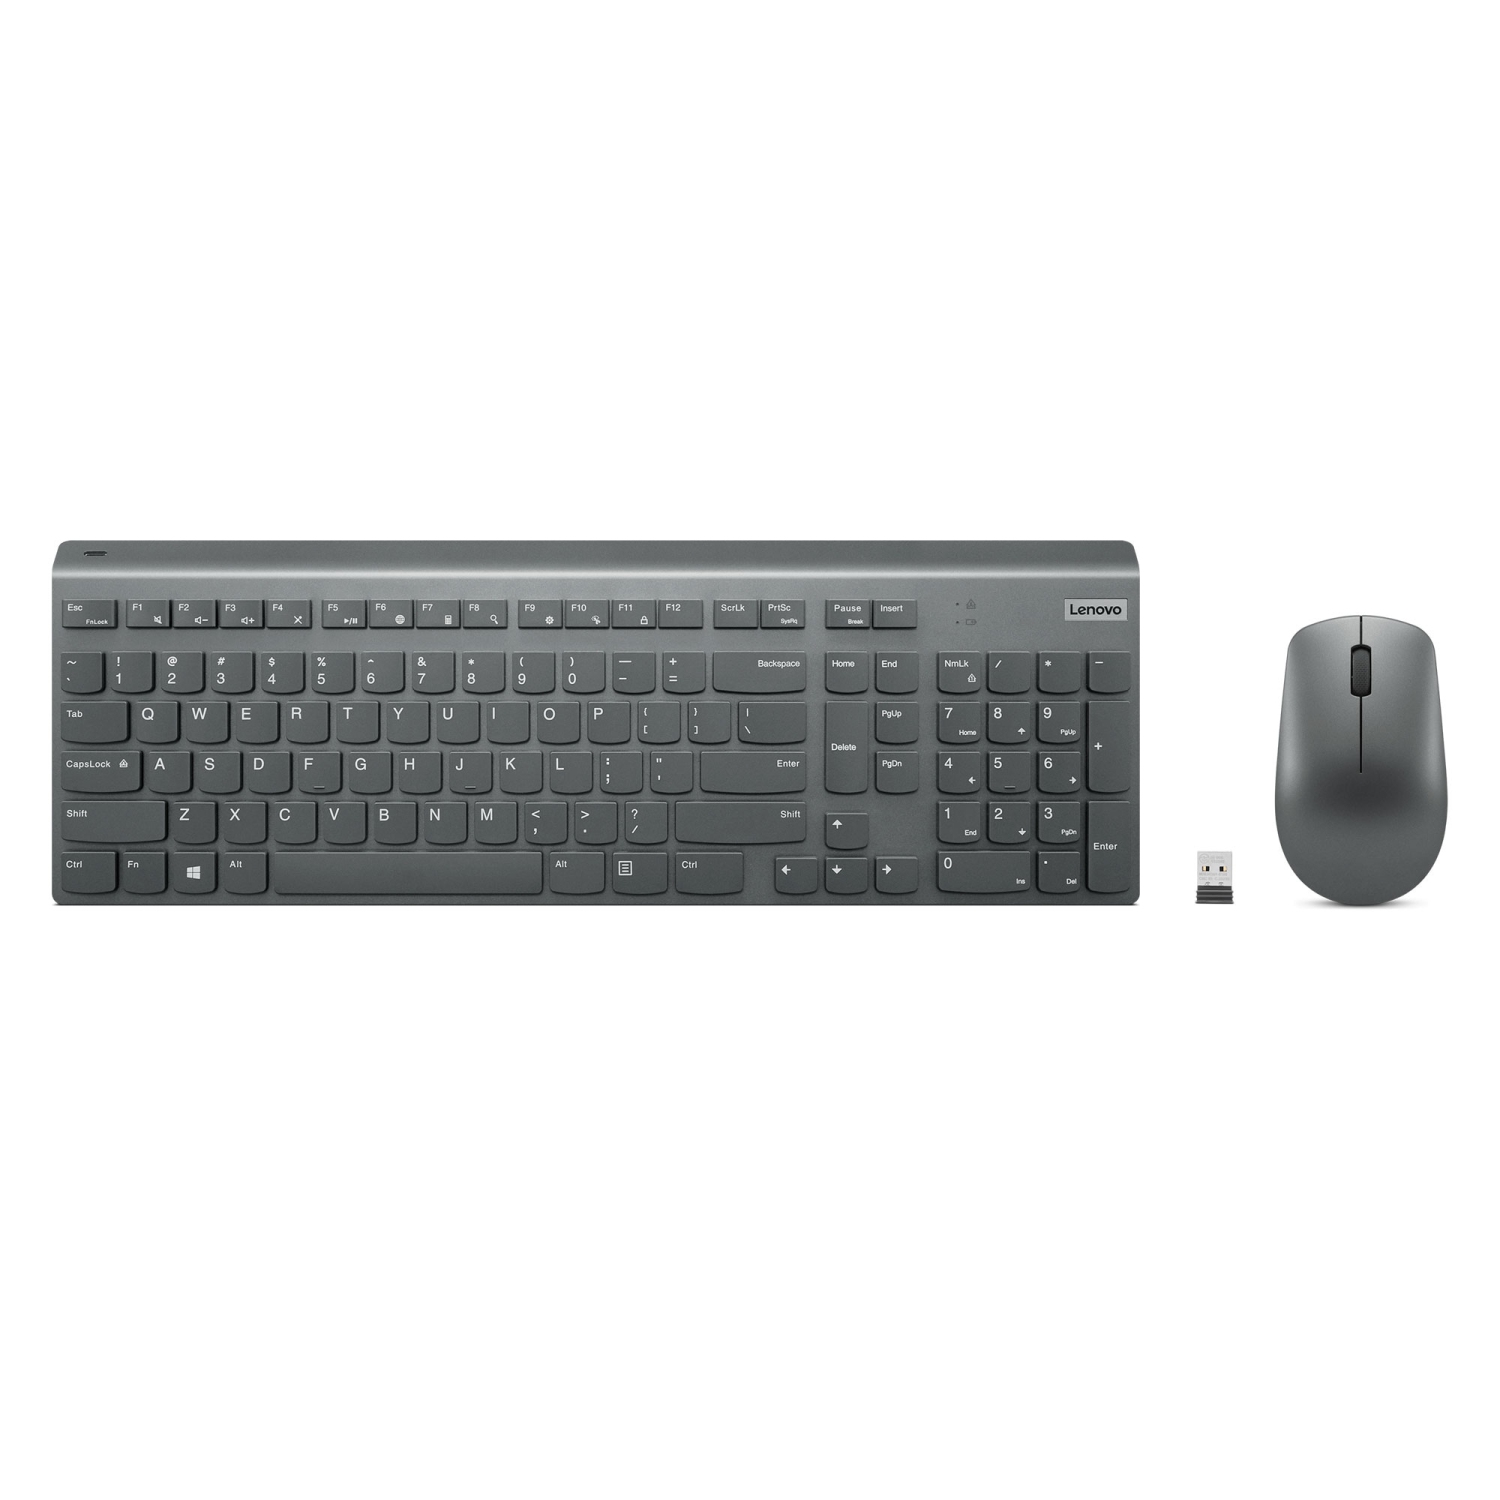 Lenovo YOGA Life Wireless Keyboard and Mouse Combo launched for 299 yuan  ($45) - Gizmochina